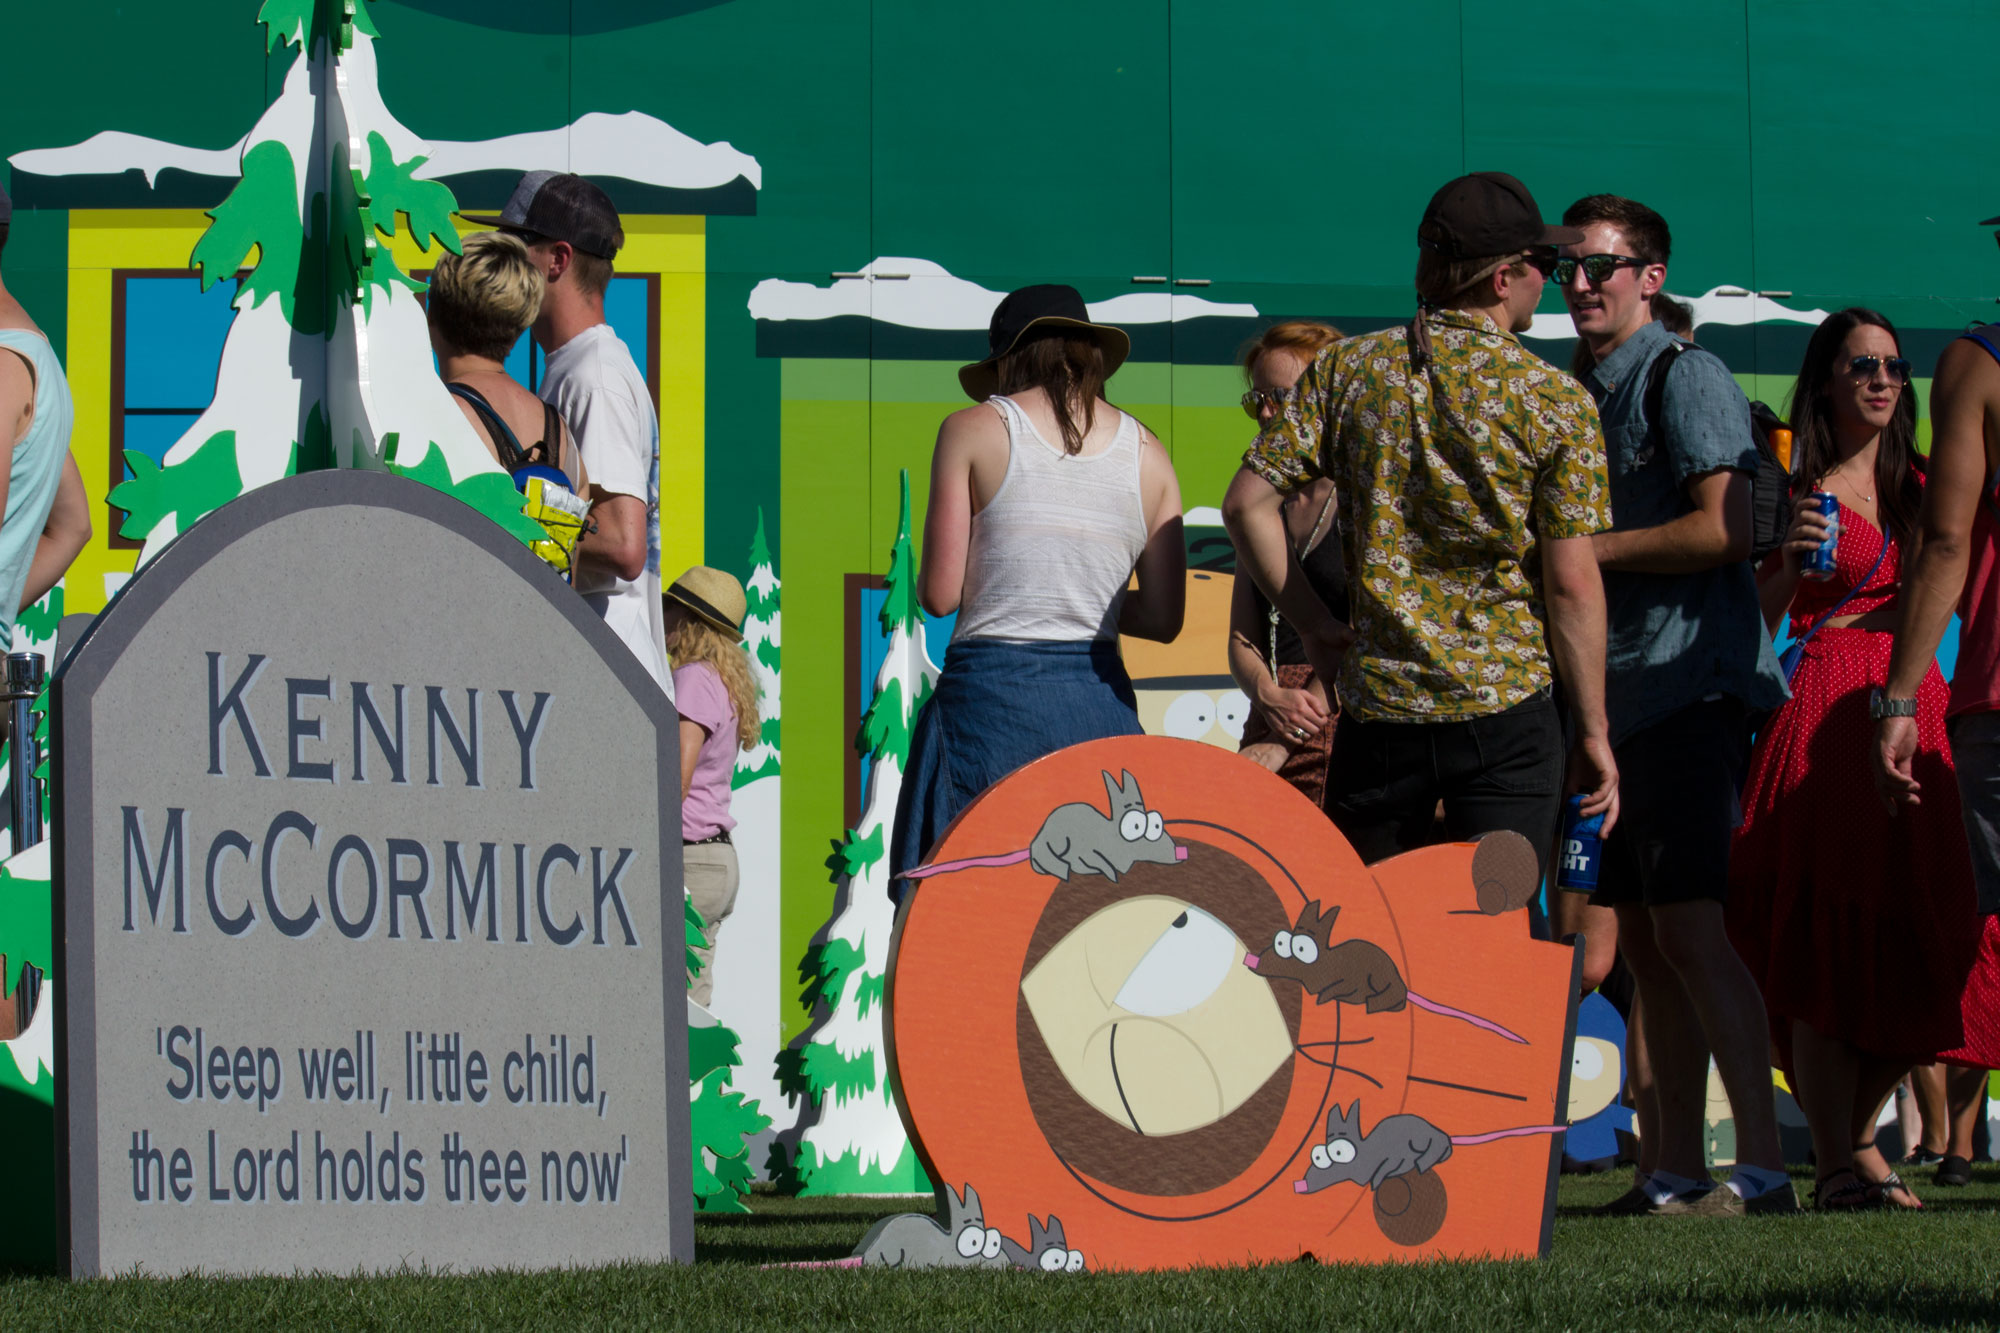 South Park theme area at Grandoozy 2018. Photo by: Matthew McGuire